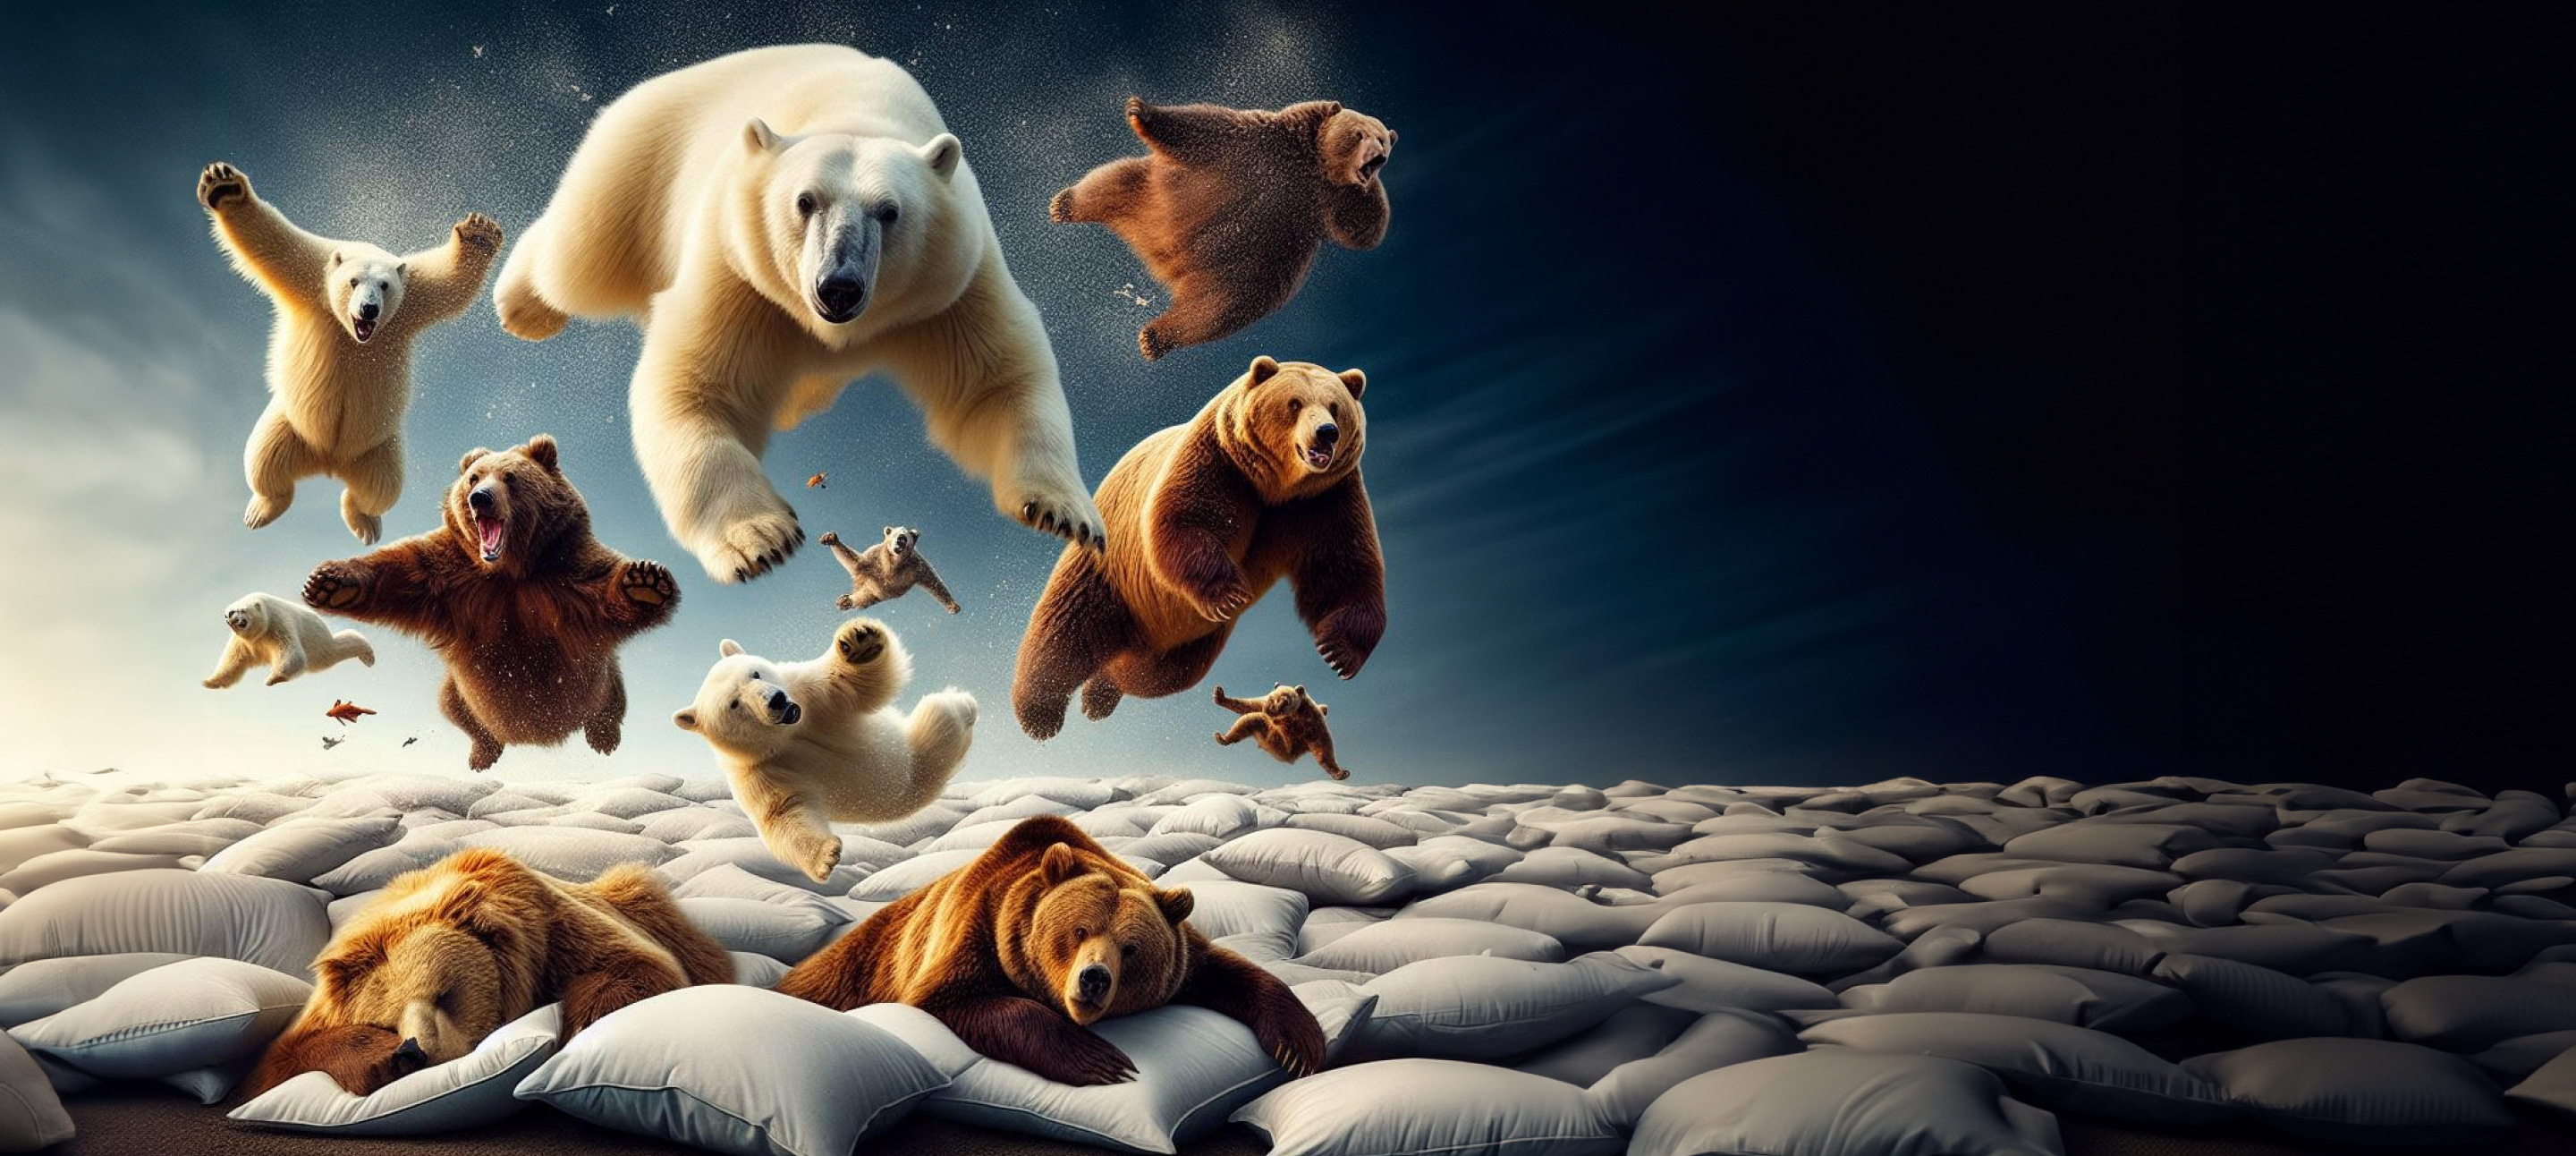 A large number of polar bears and grizzly bears floating through the sky above a large pile of pillows.